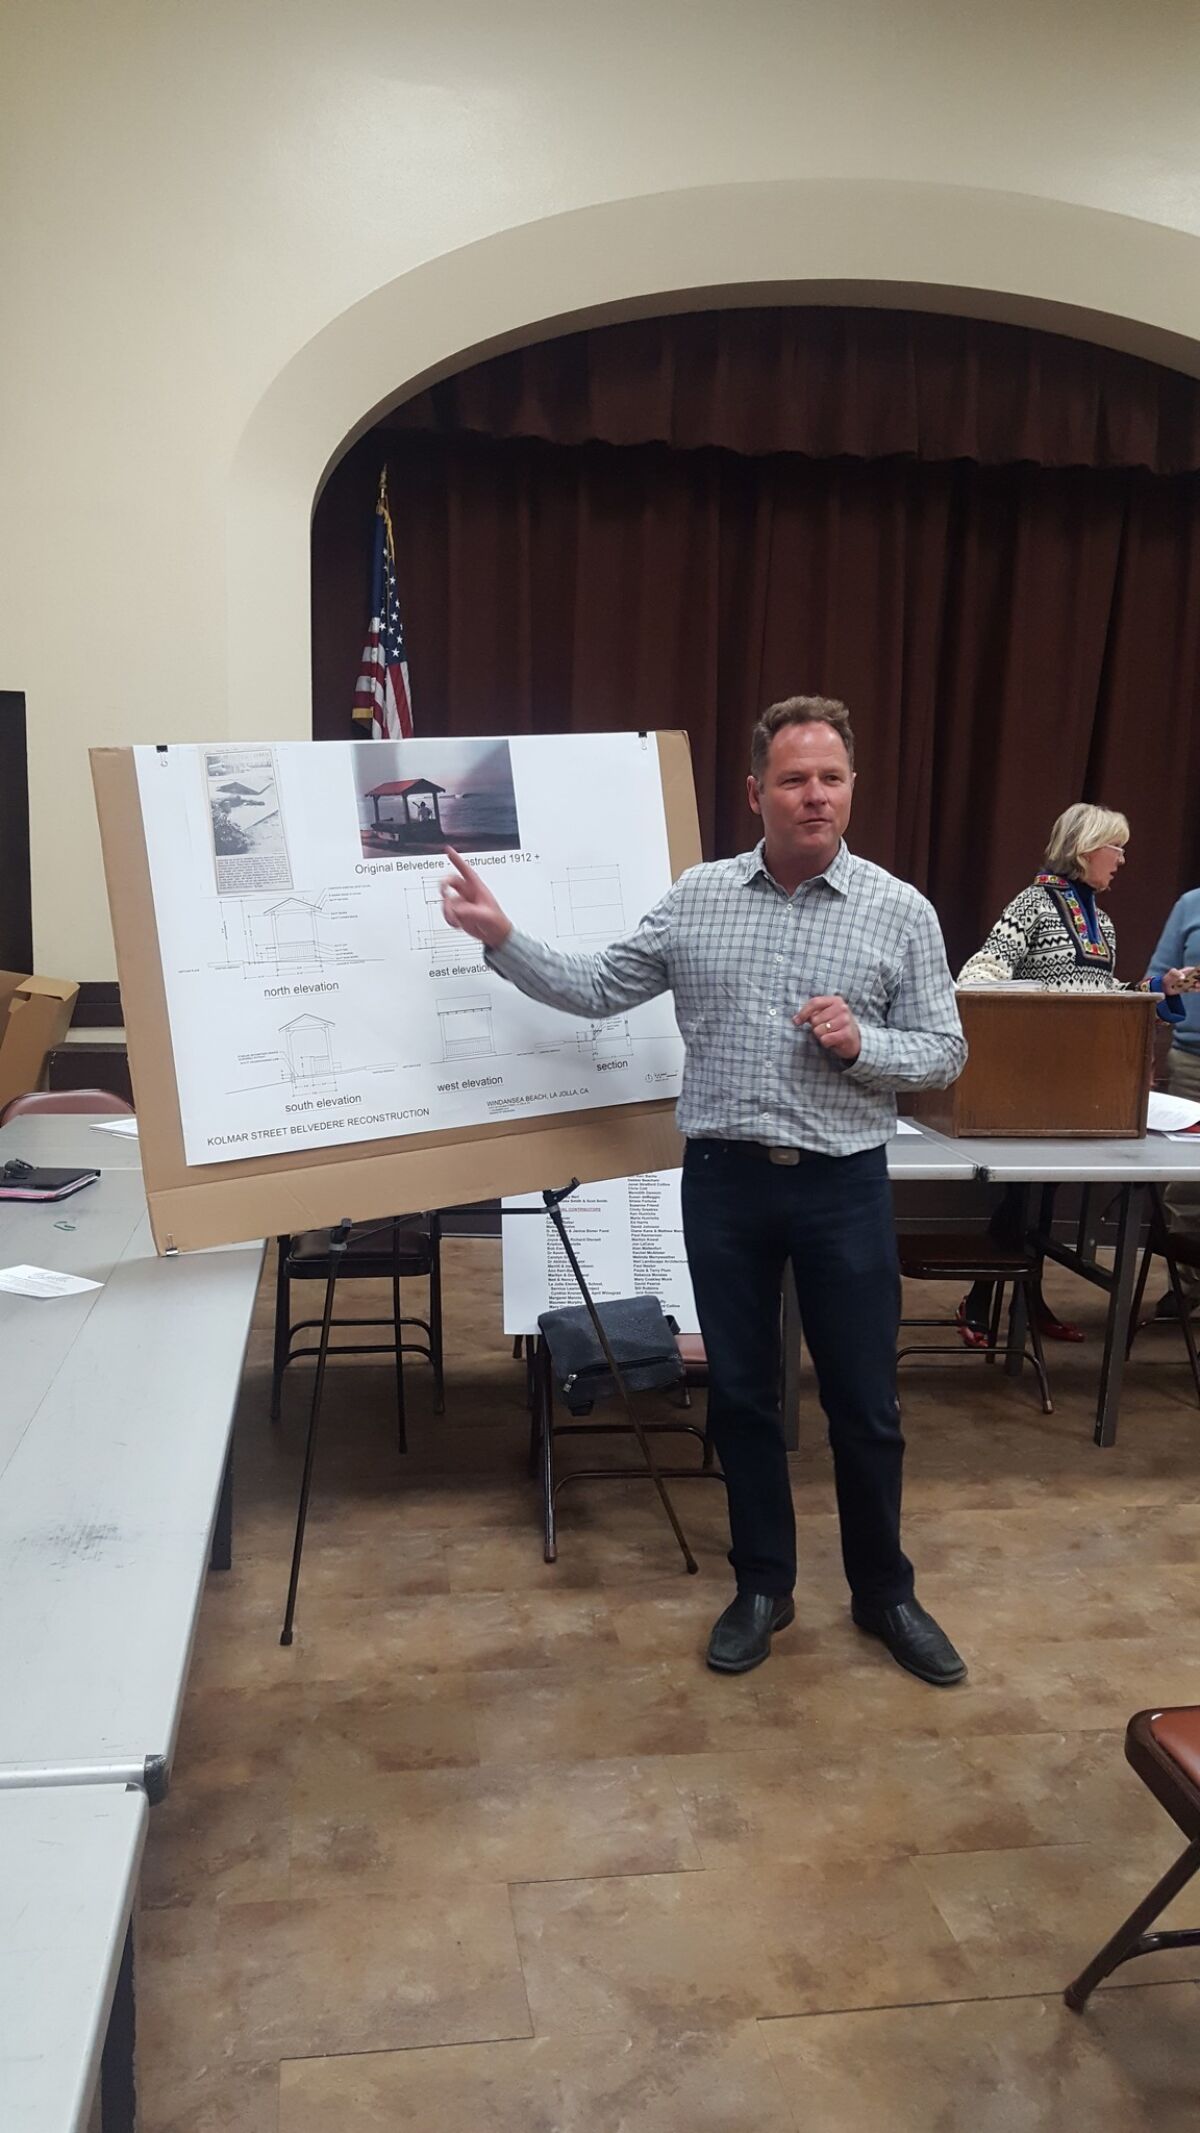 Jim Neri presents plans to replace a belvedere at Windansea Beach during a La Jolla Parks & Beaches meeting in December 2018.